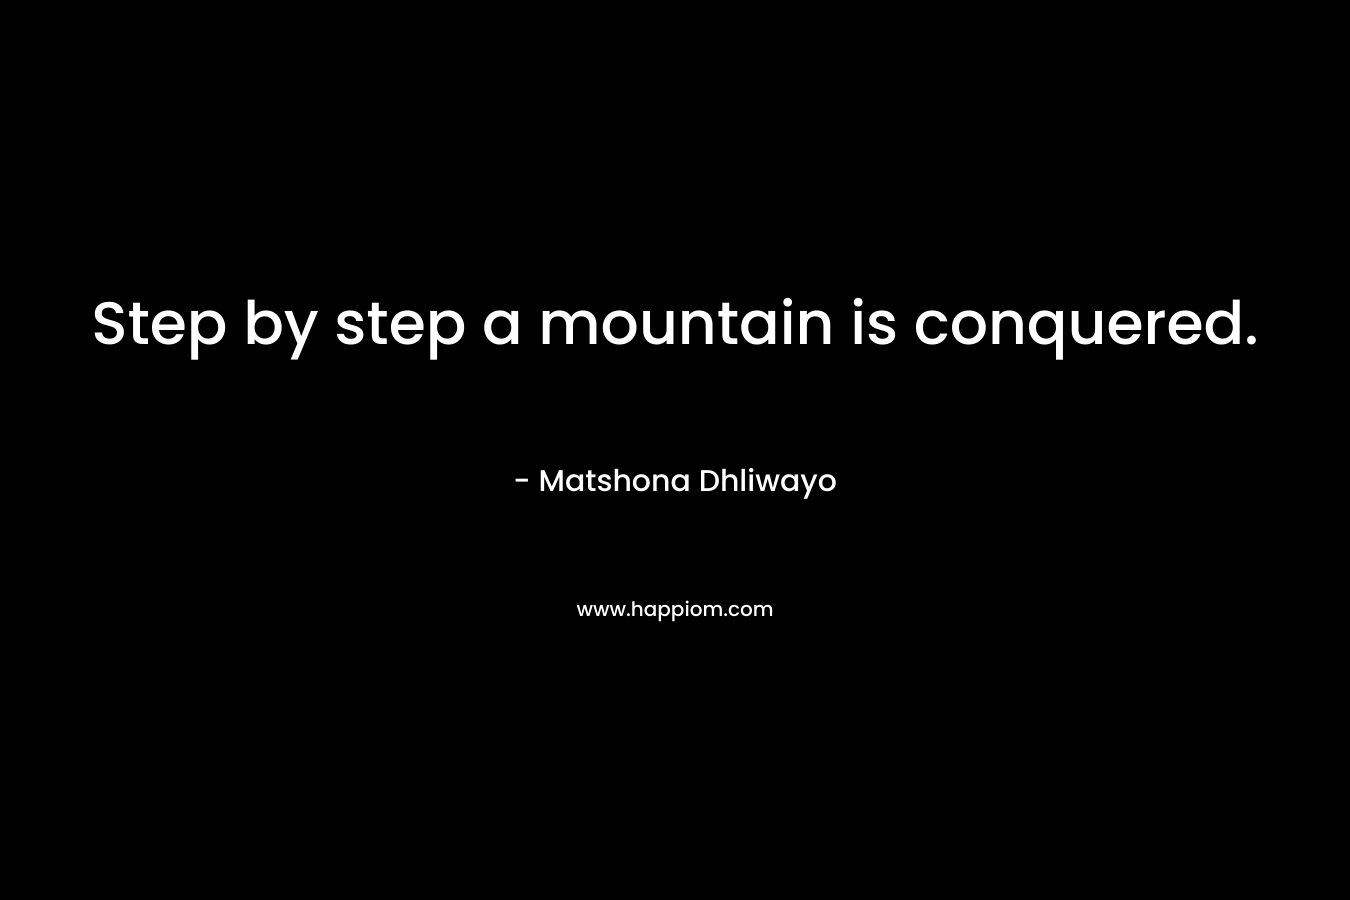 Step by step a mountain is conquered.